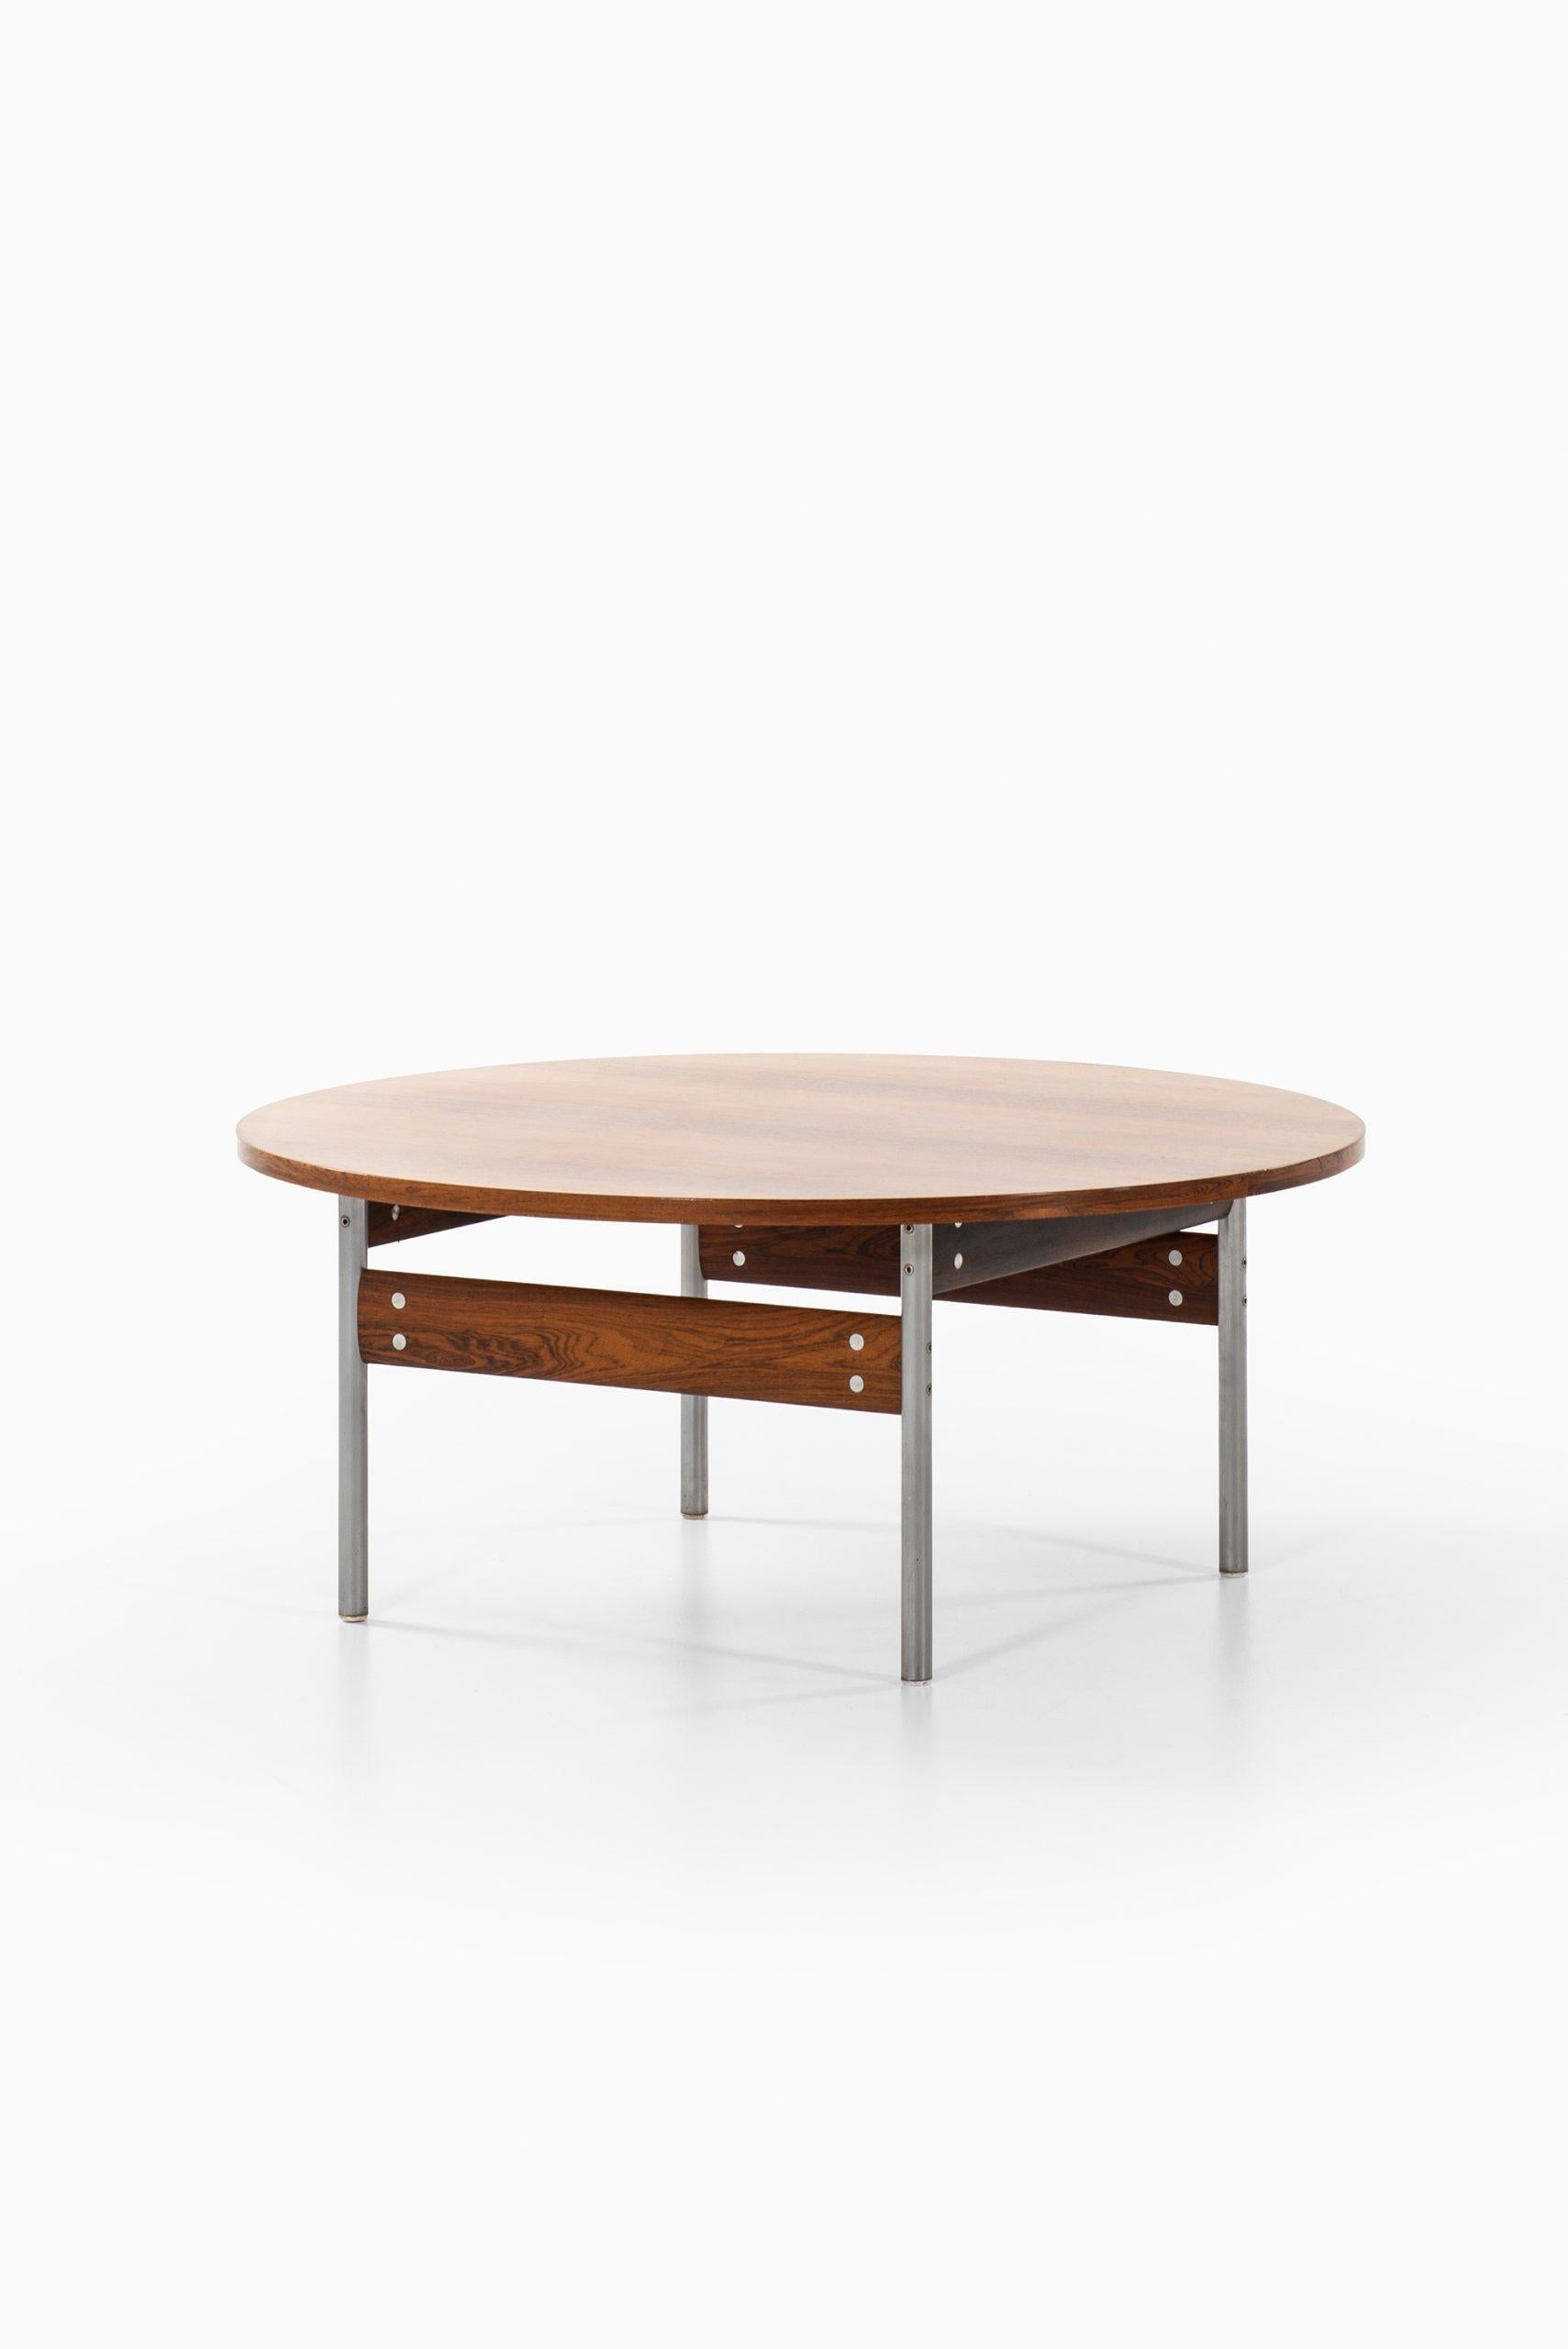 Norwegian Sven Ivar Dysthe Coffee Table Produced by Dokka Møbler in Norway For Sale